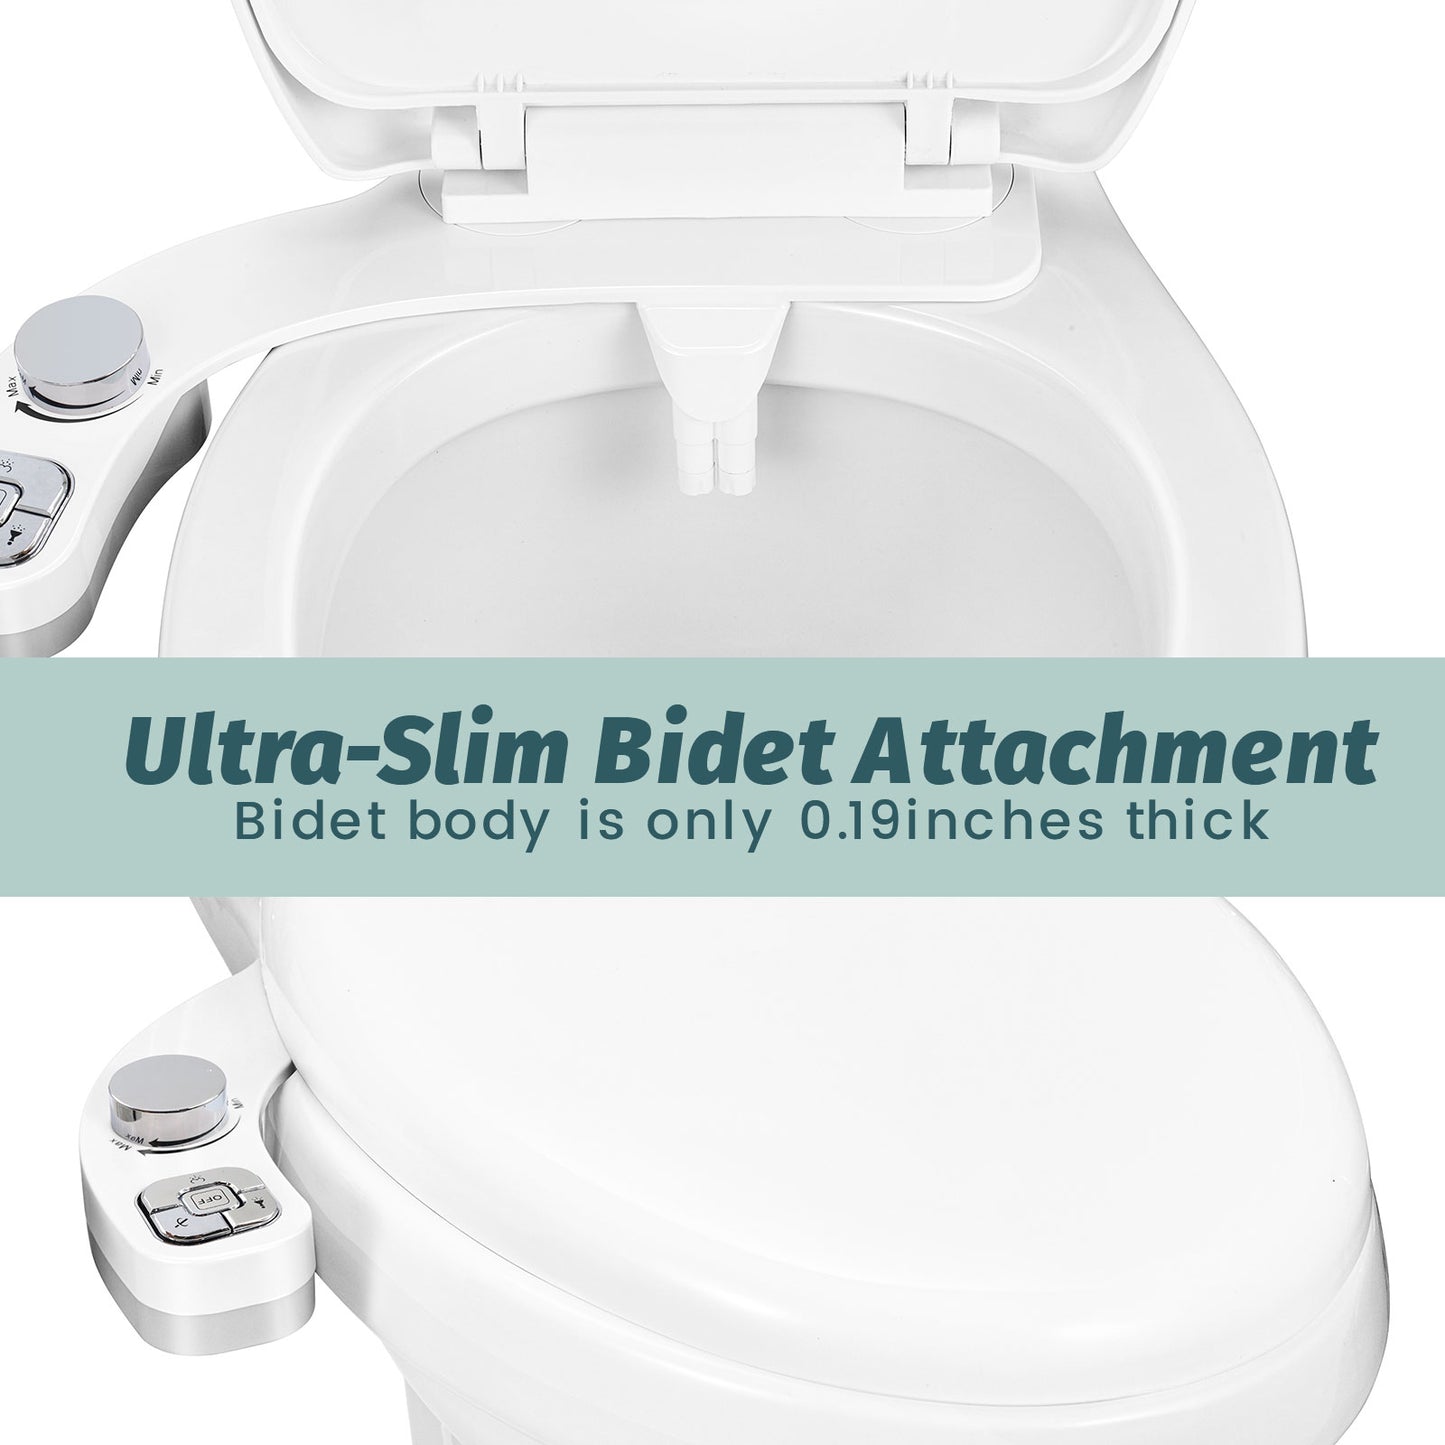 Hygienic Non-Electric Button Bidet - Dual Nozzle Fresh Water Toilet Seat Attachment with Self-Cleaning and Frontal/Rear Wash Functions